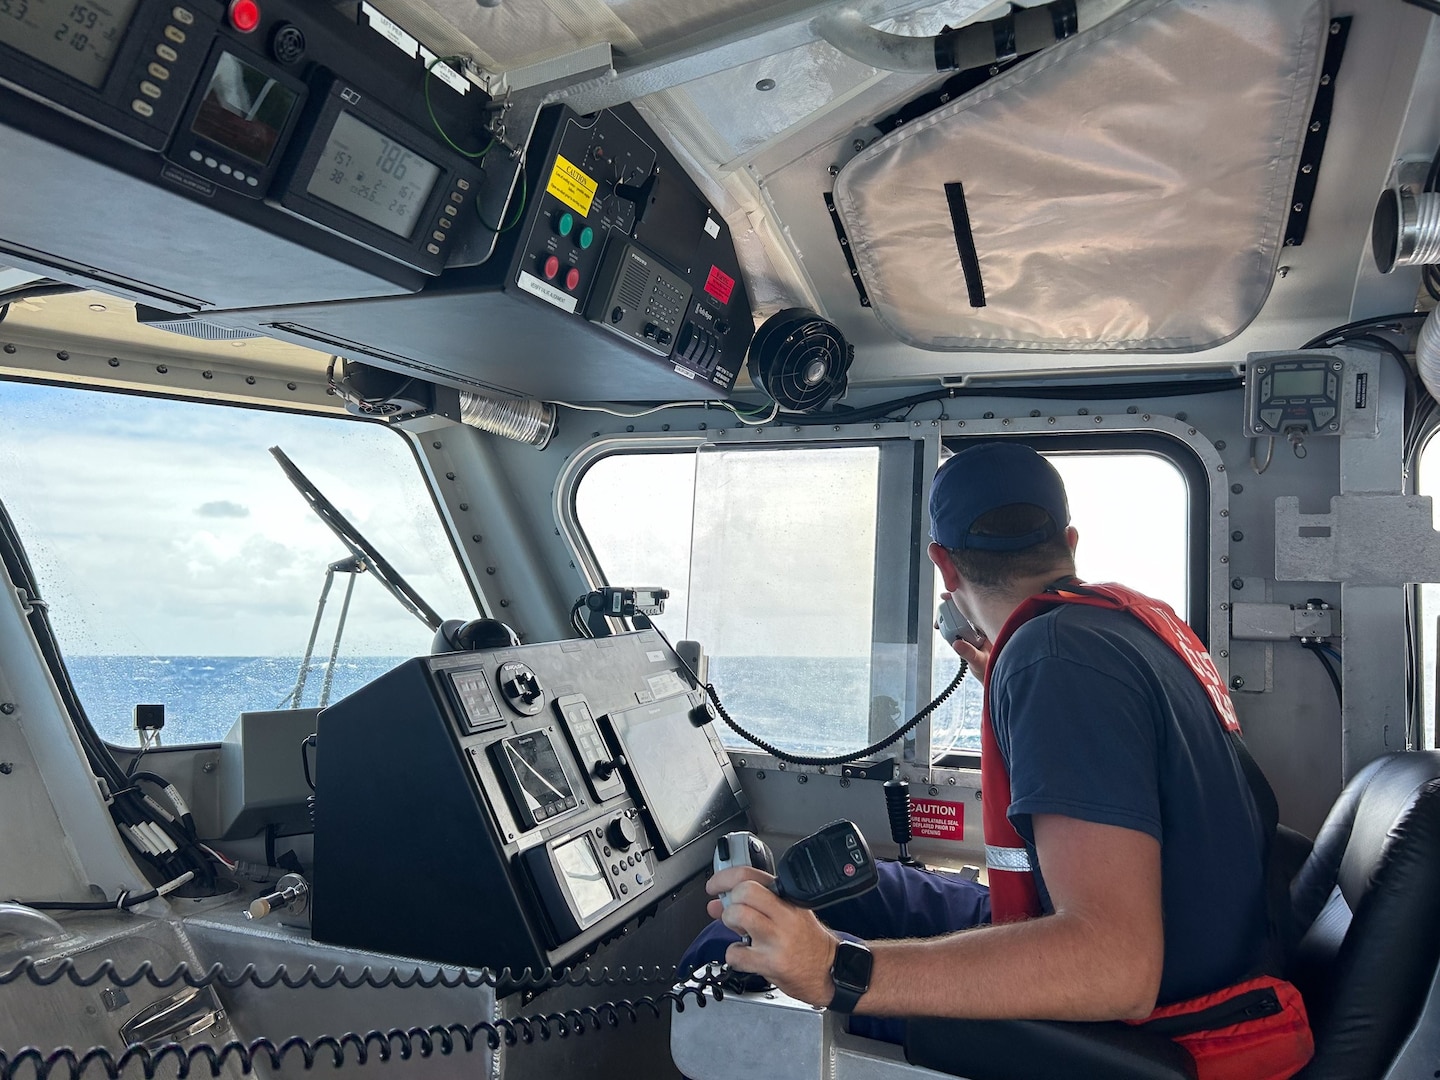 Coast Guard Suspends search for 2 after helicopter crash near Na Pali Coast